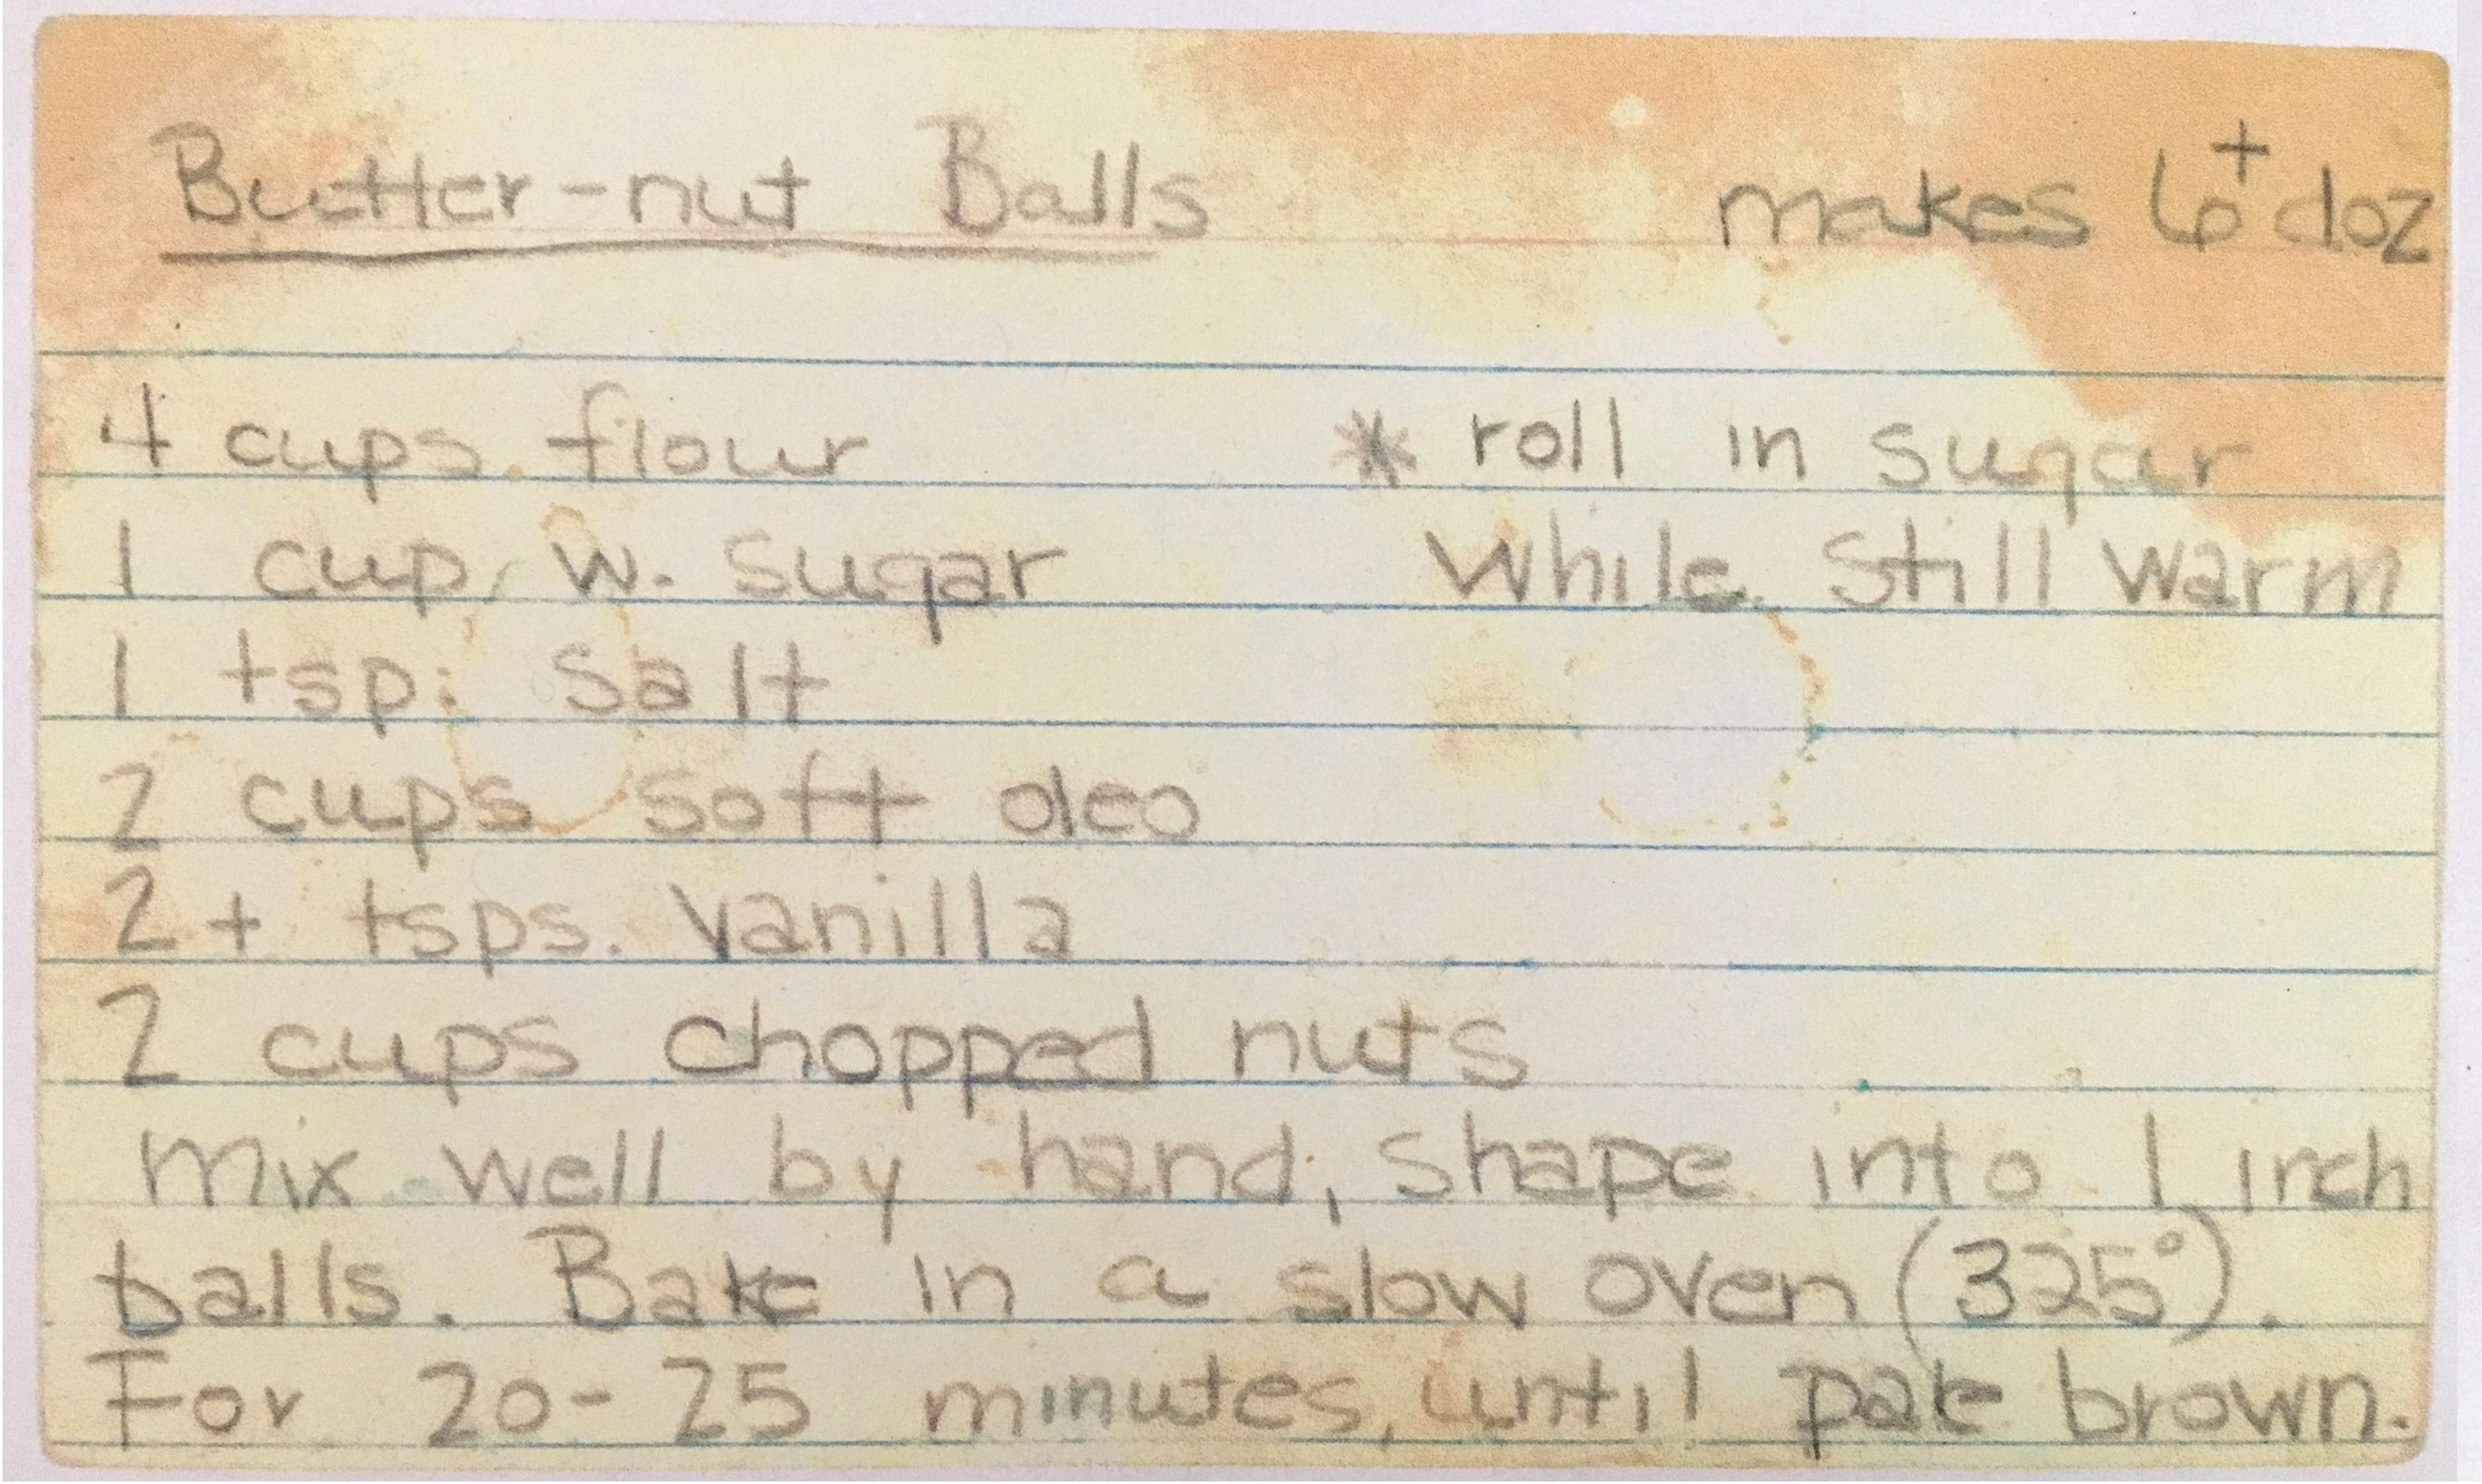 A stained, hand-written recipe card for Butter-Nut Balls.